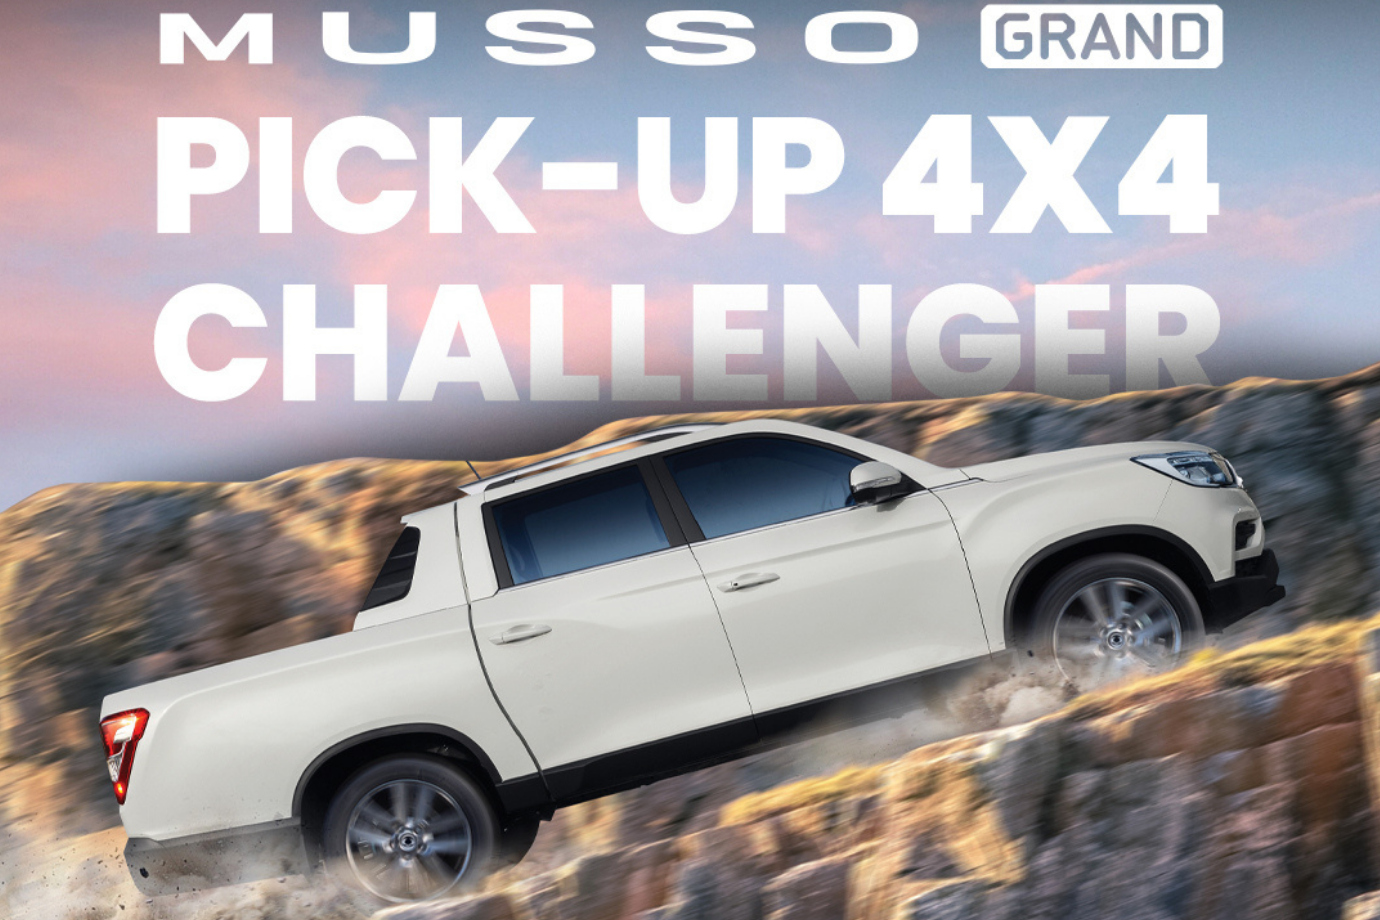 Musso pick up 4 x 4 Challenger